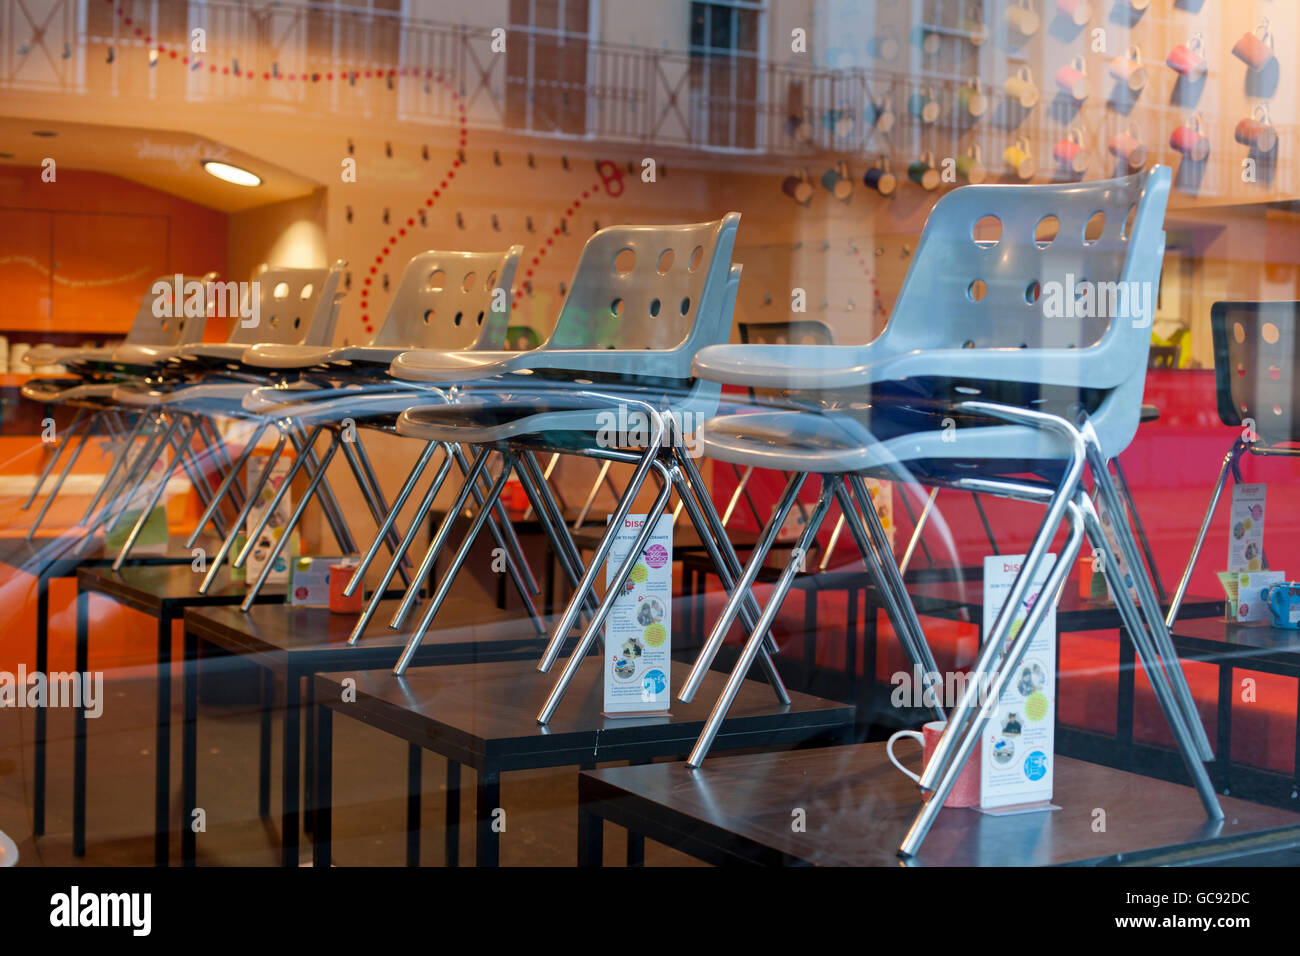 Rows of chairs stacked on tables in a cafe restaurant Stock Photo